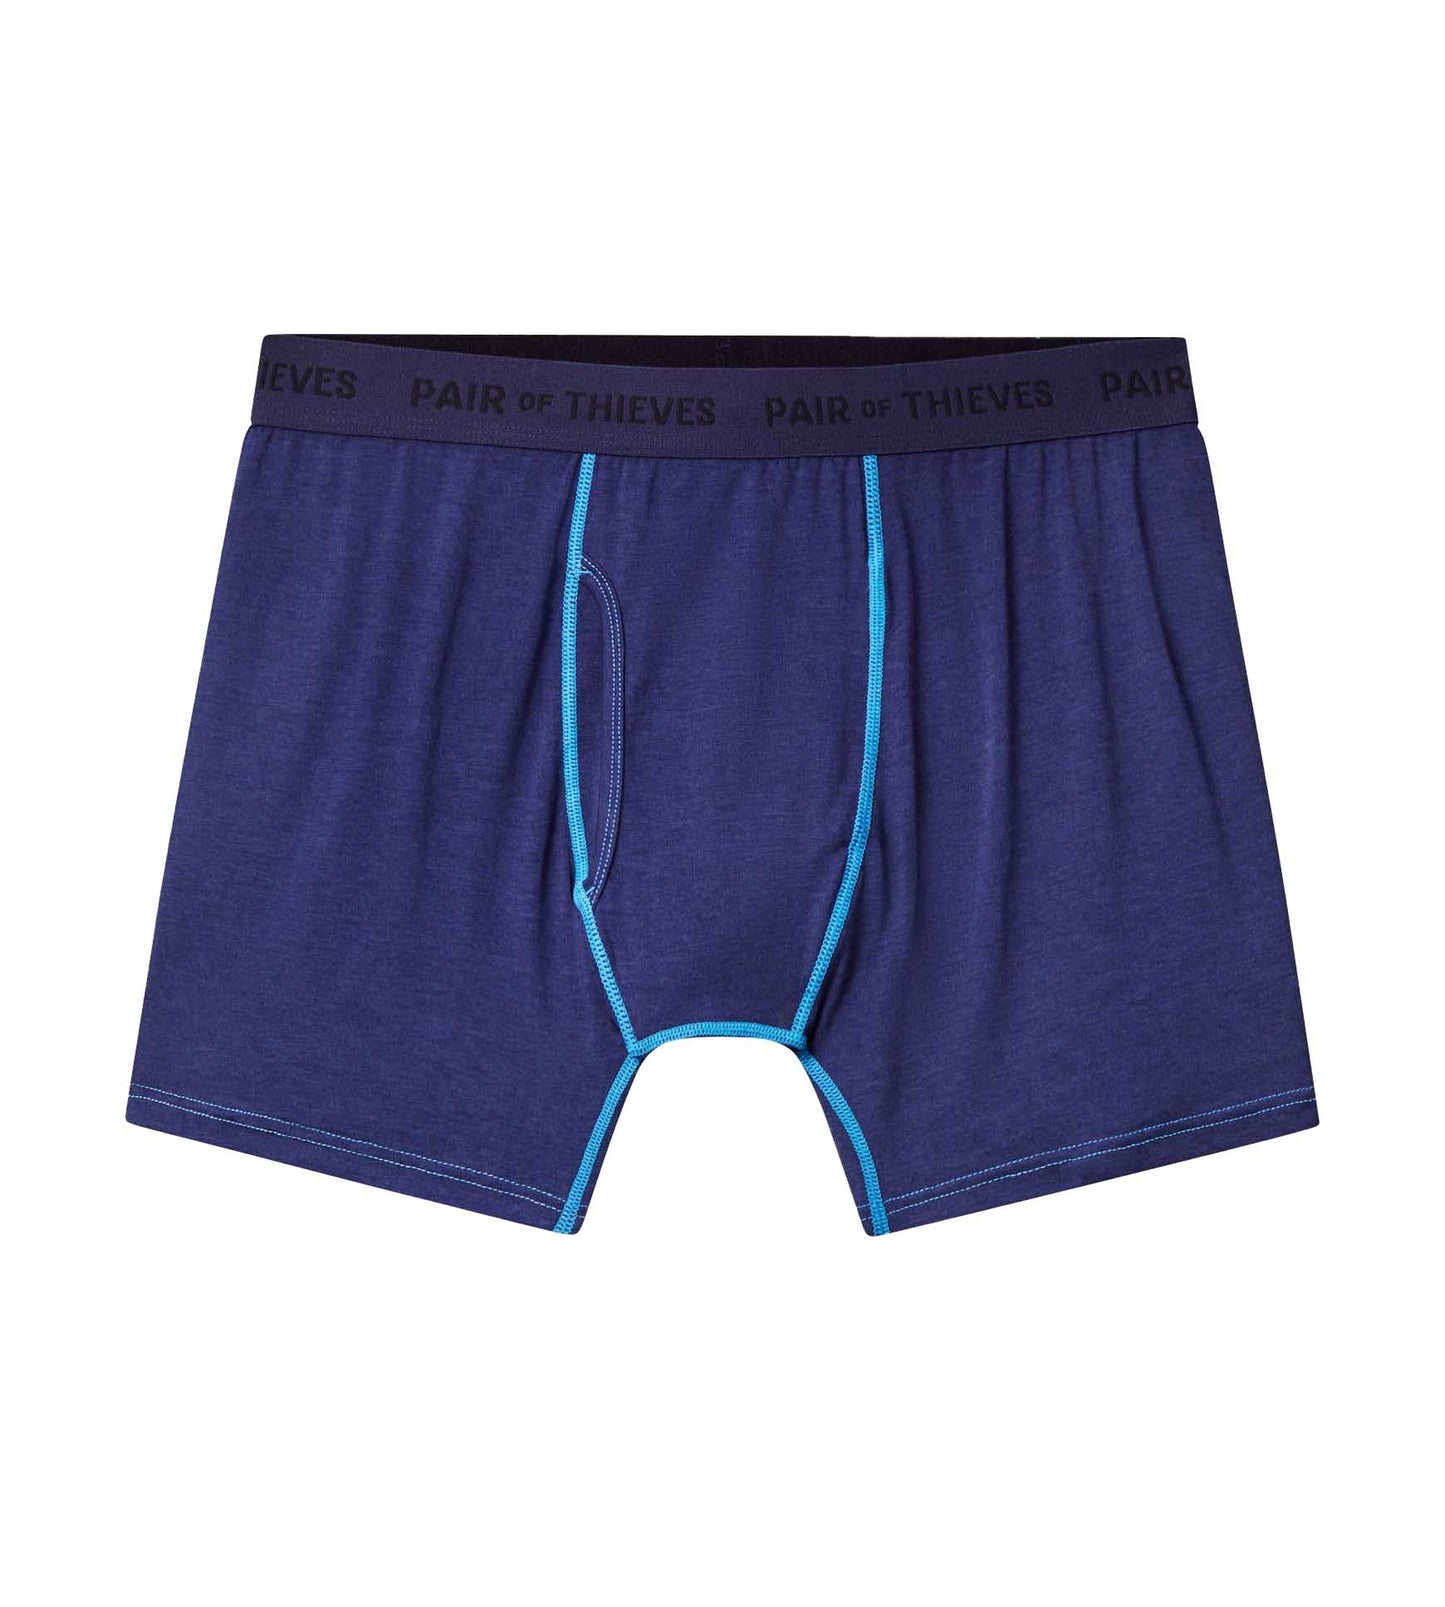 SuperSoft Boxer Briefs 2 Pack